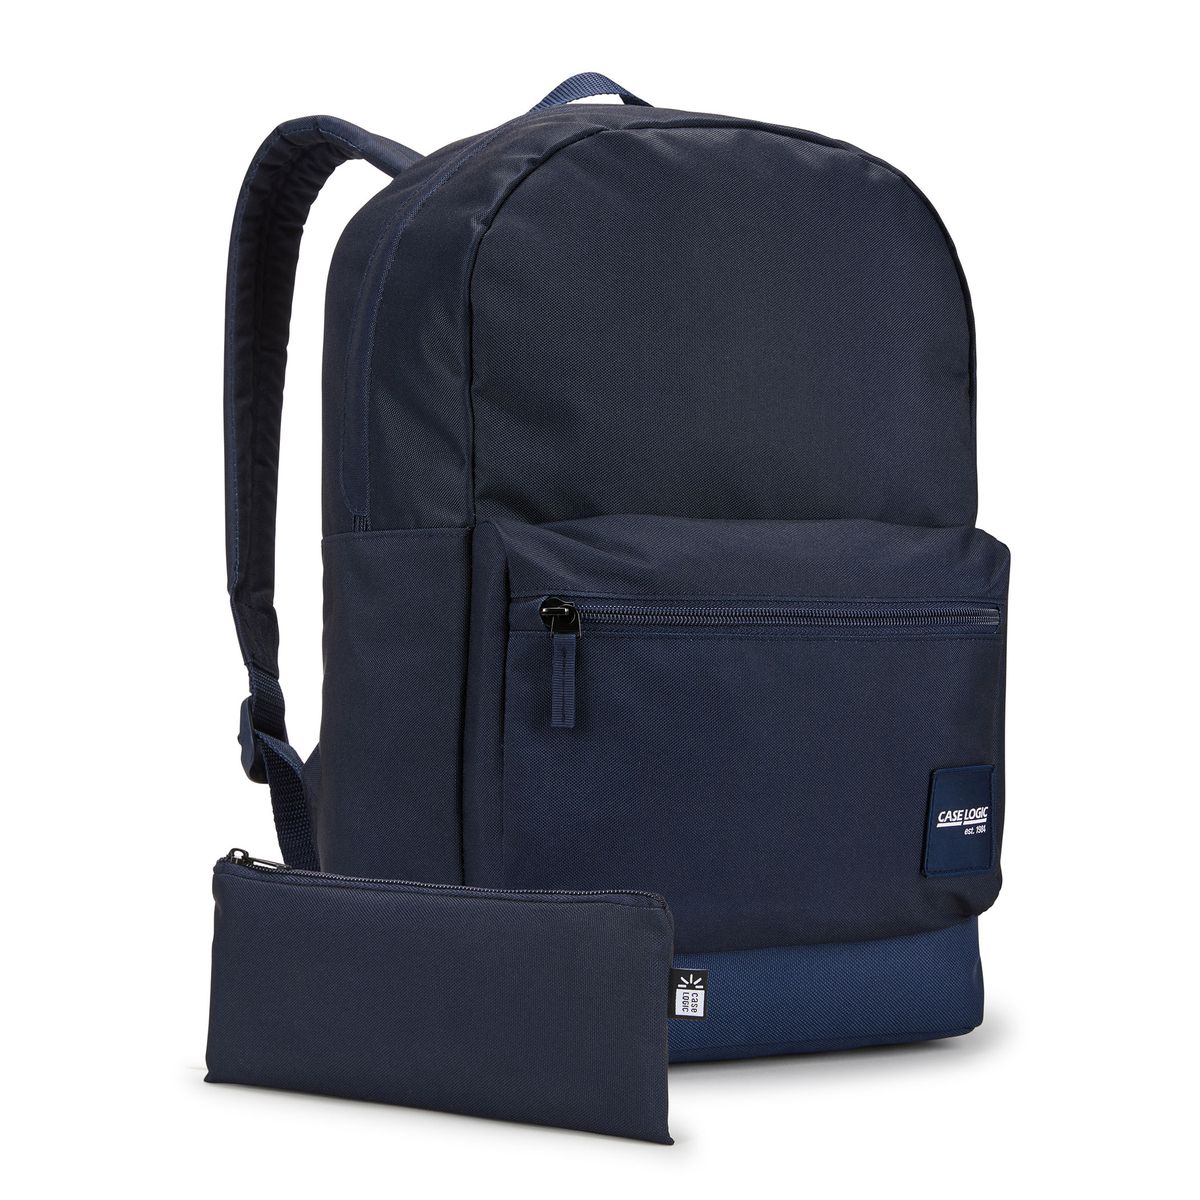 Case Logic Alto Recycled Backpack